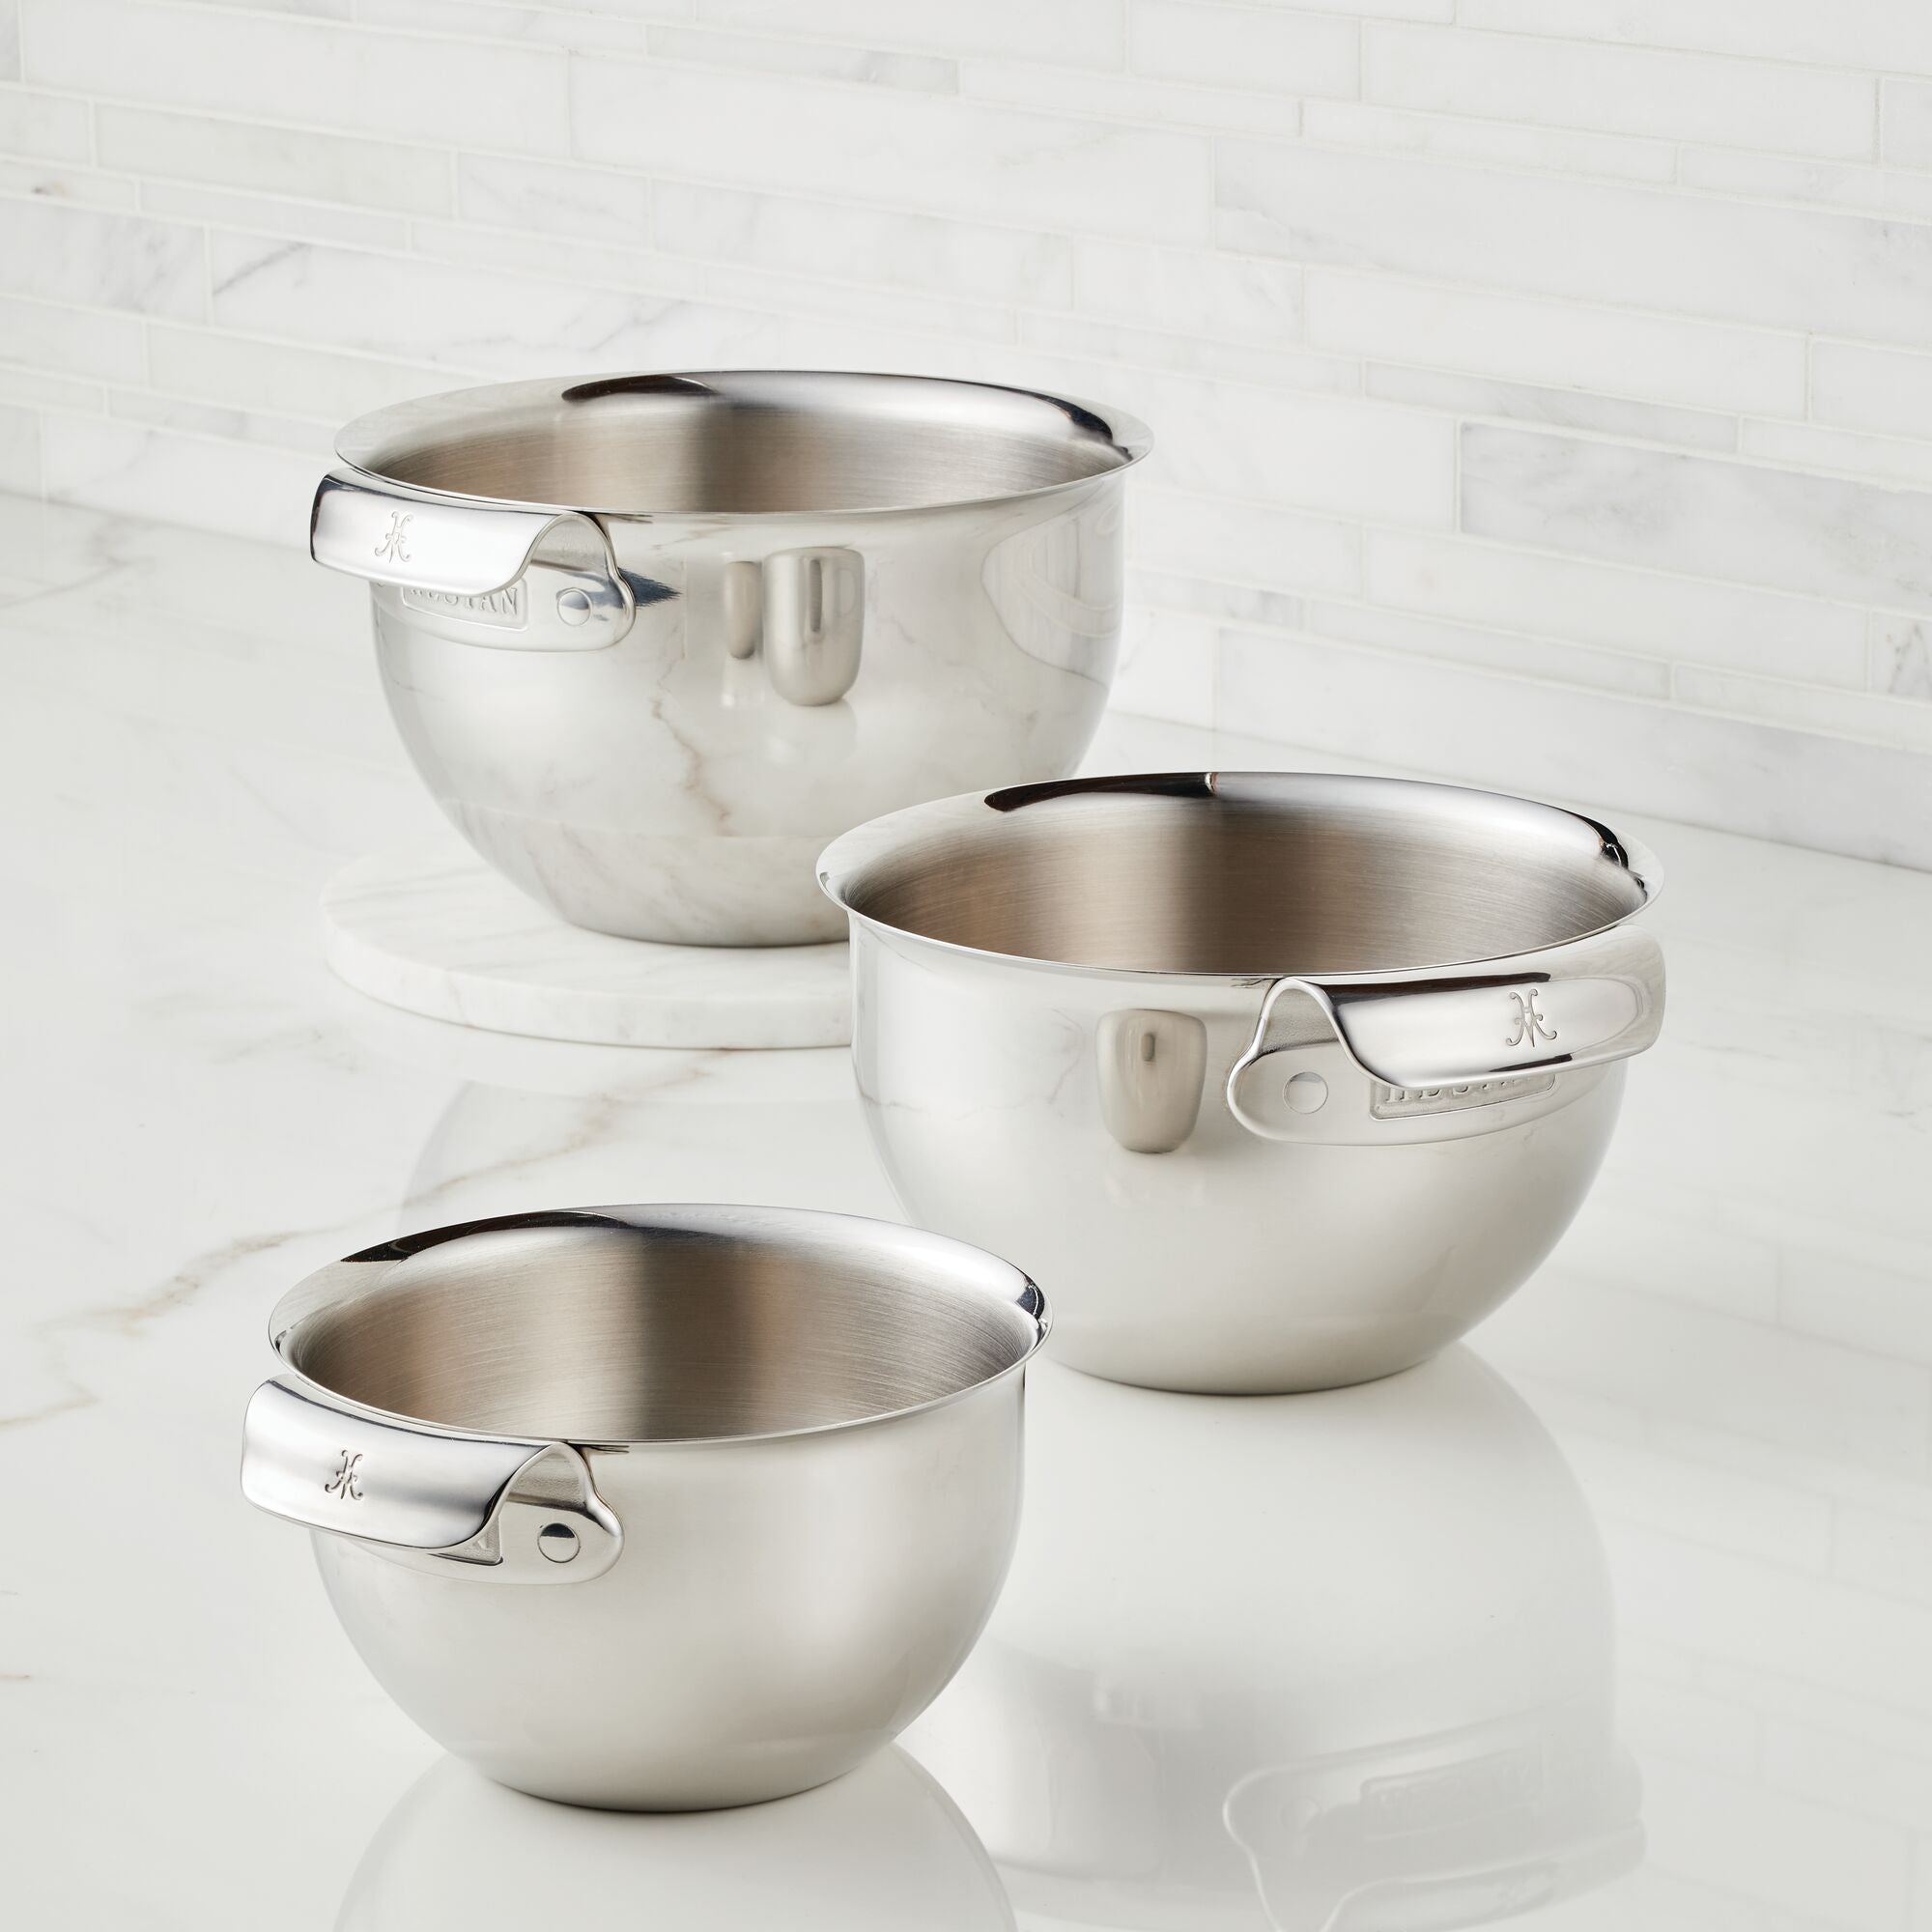 Culinary Depot Stainless Mixing Bowls Steel Set of 6 for Cooking, Baking, Meal Prep, Serving